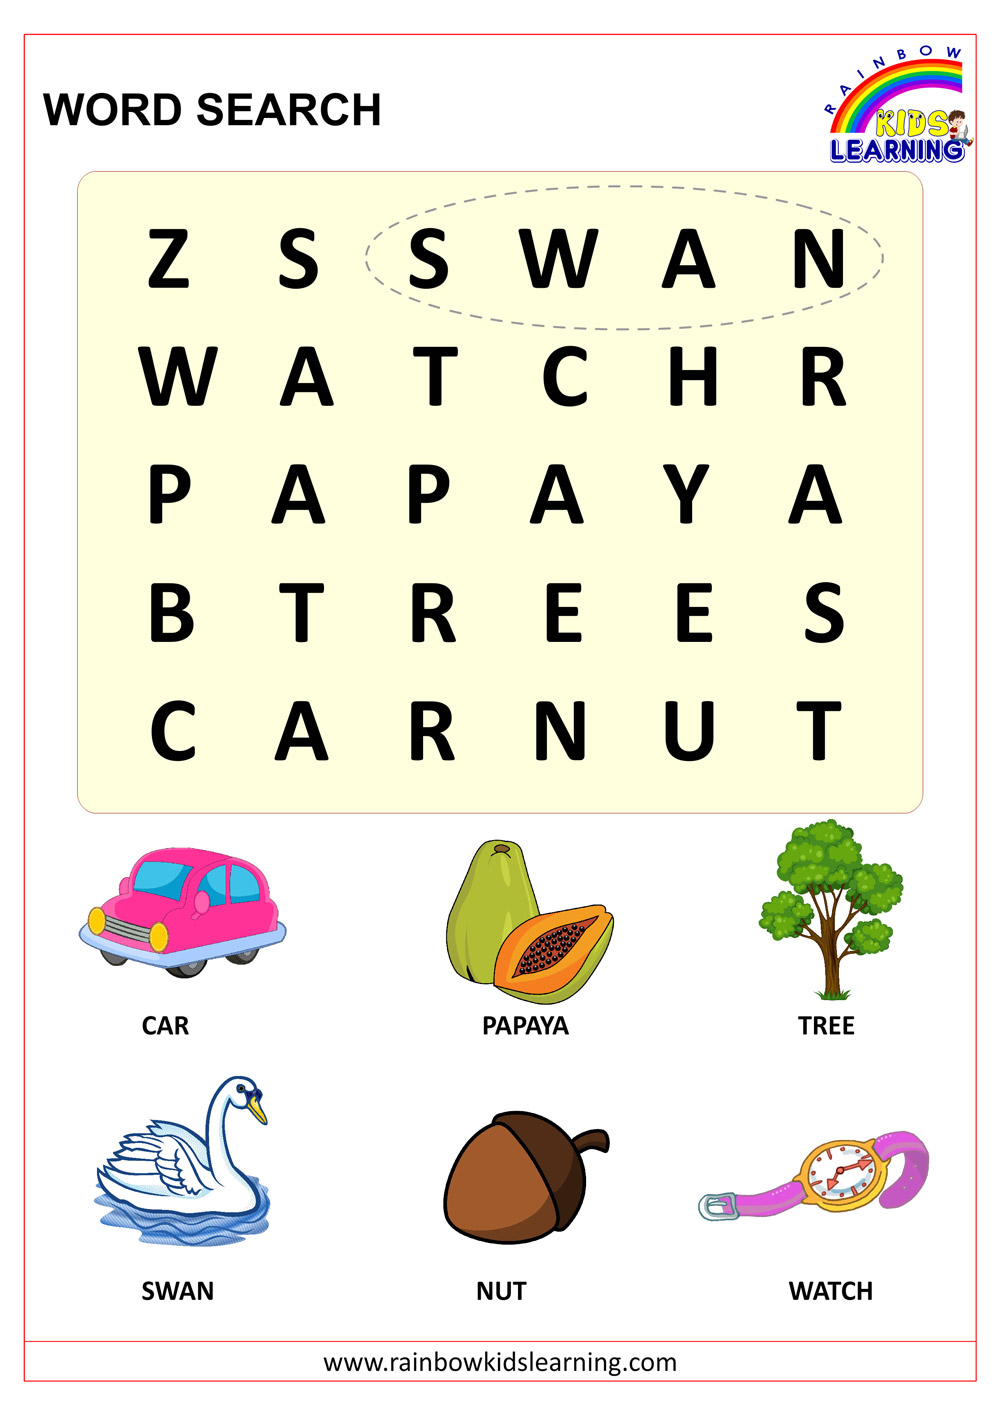 Word Search Puzzles for Kids - Rainbow Kids Learning